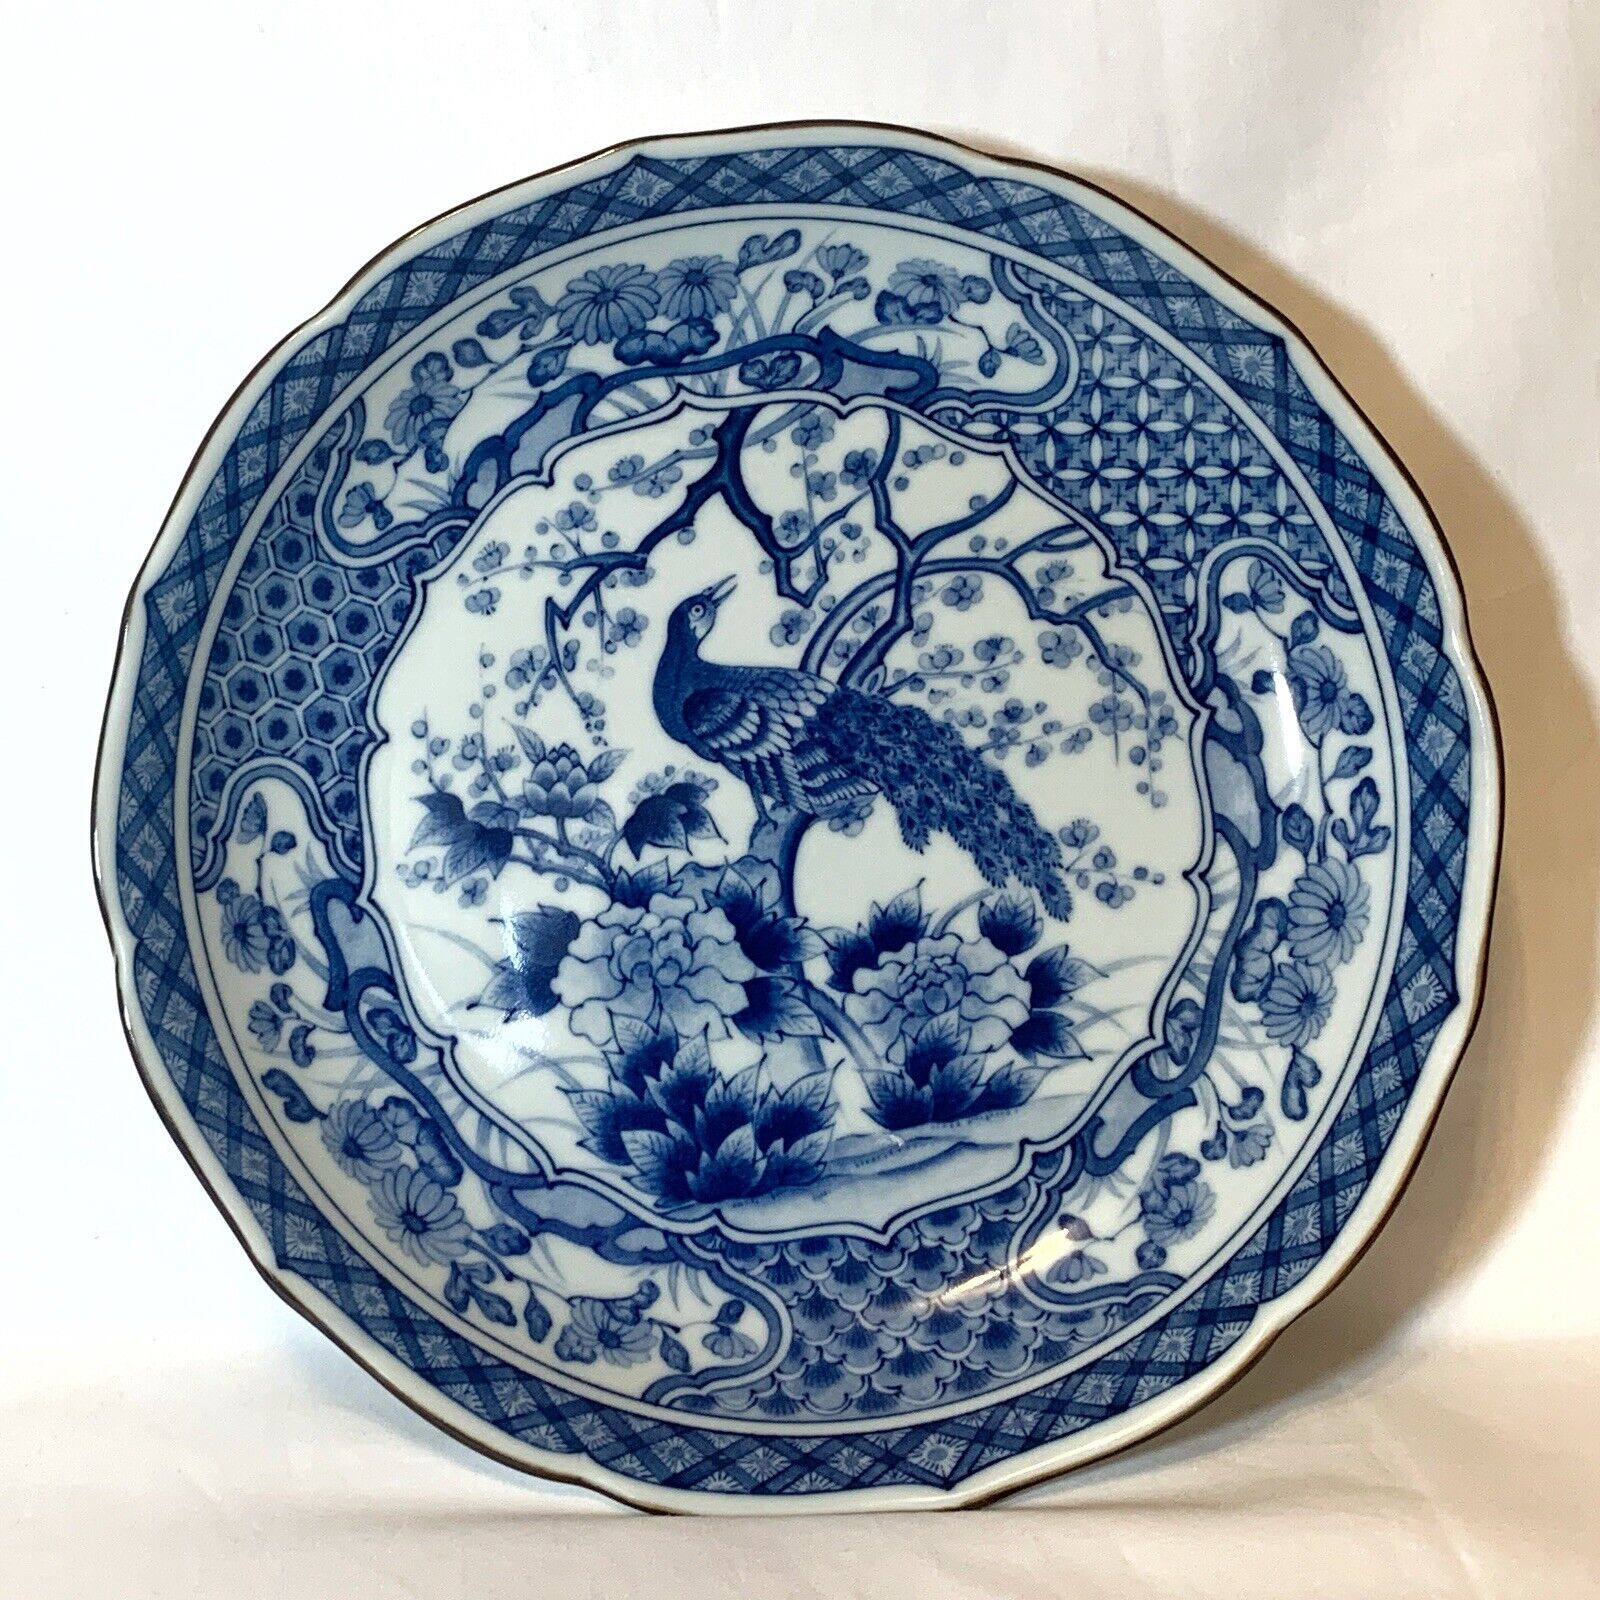 Vintage TOYO Japanese Blue White Porcelain Peacock Serving Dish 10 Inches